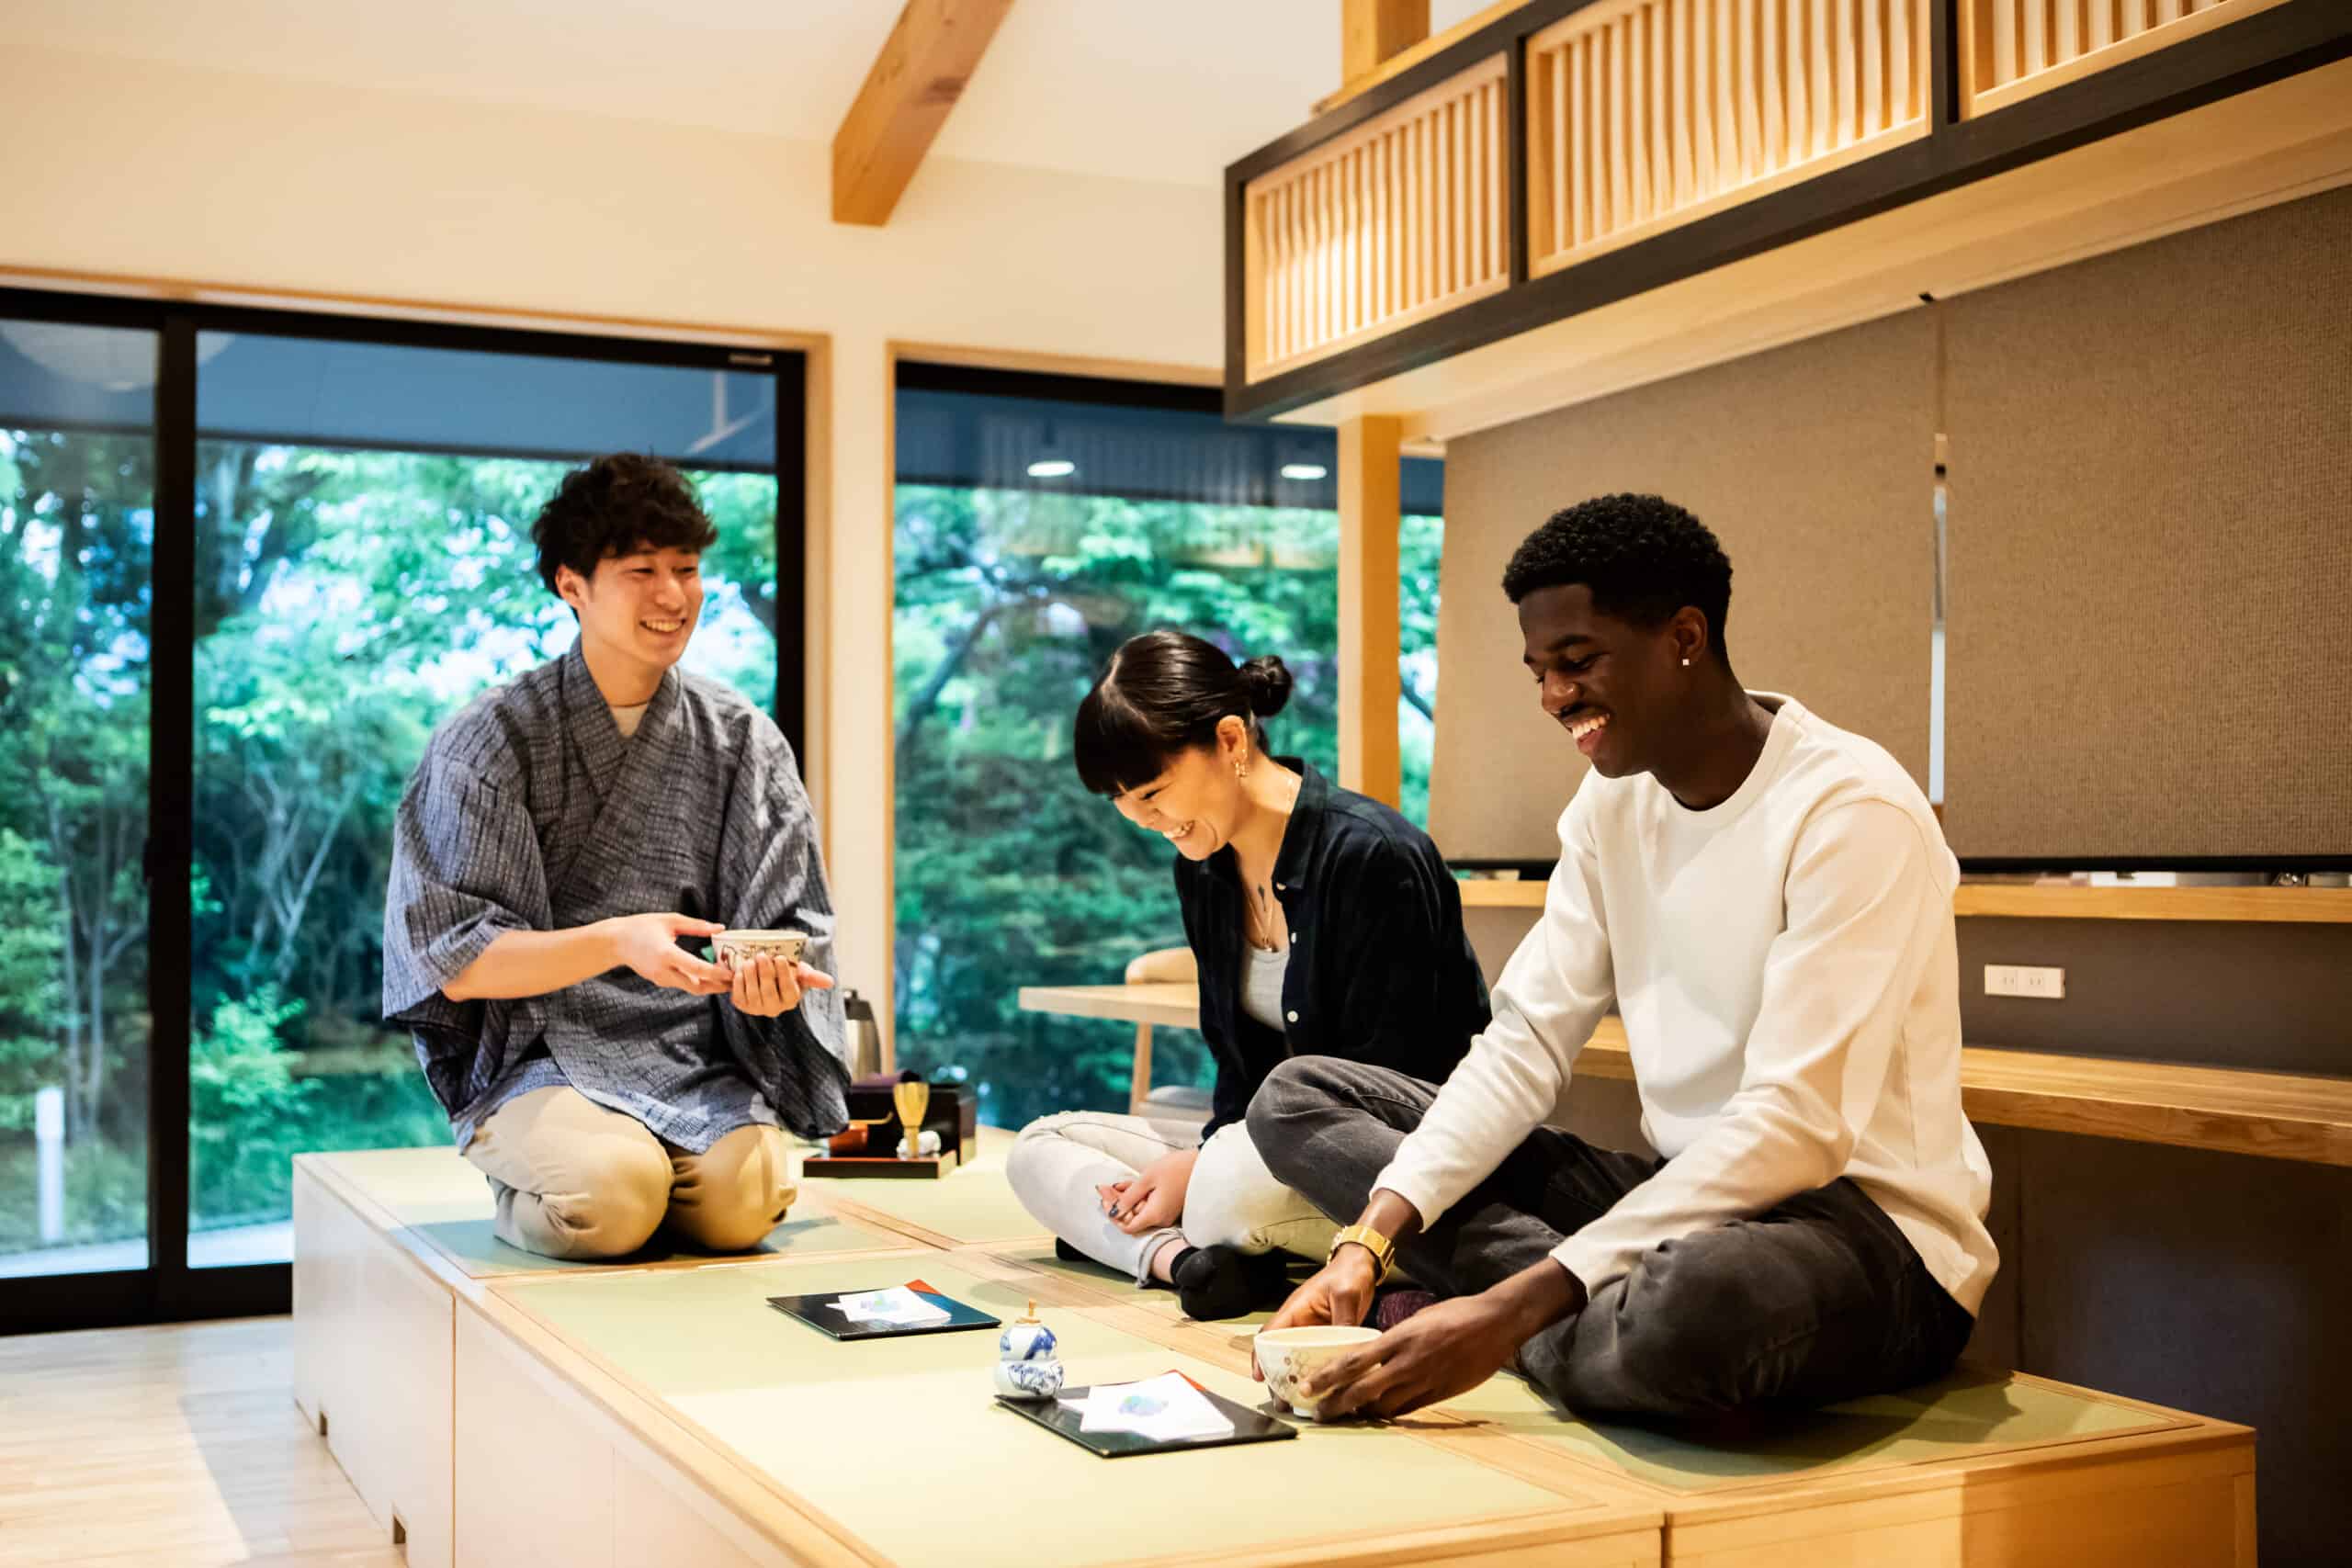 Three people of different genders and ethnicities enjoying tea and conversation in a traditional Japanese-style room with large windows and a wooden interior.